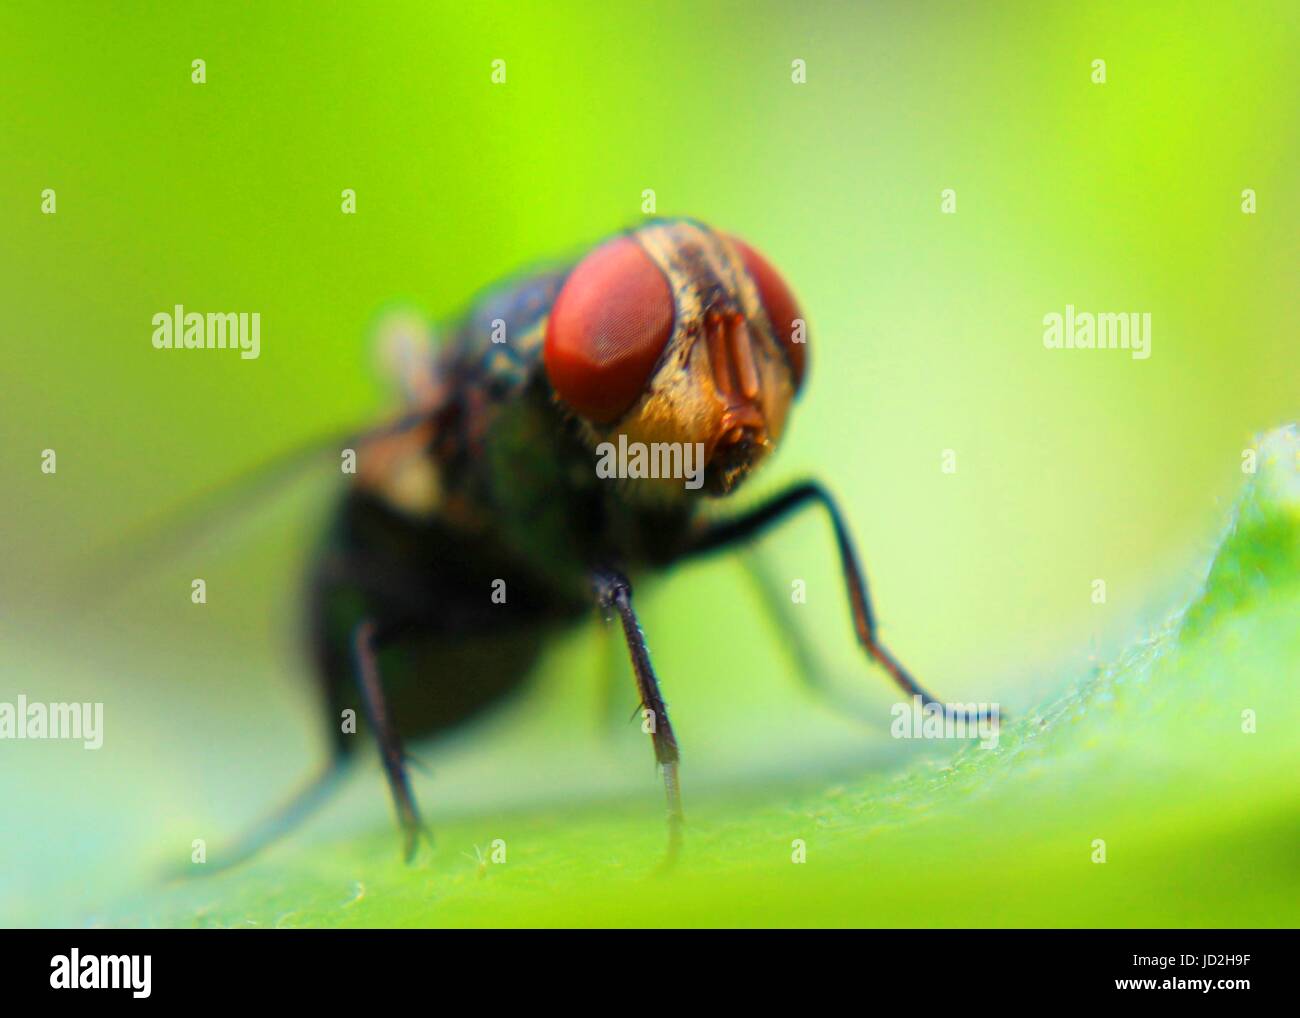 macro - close up view of a common green bottle fly with red color compound eyes Stock Photo